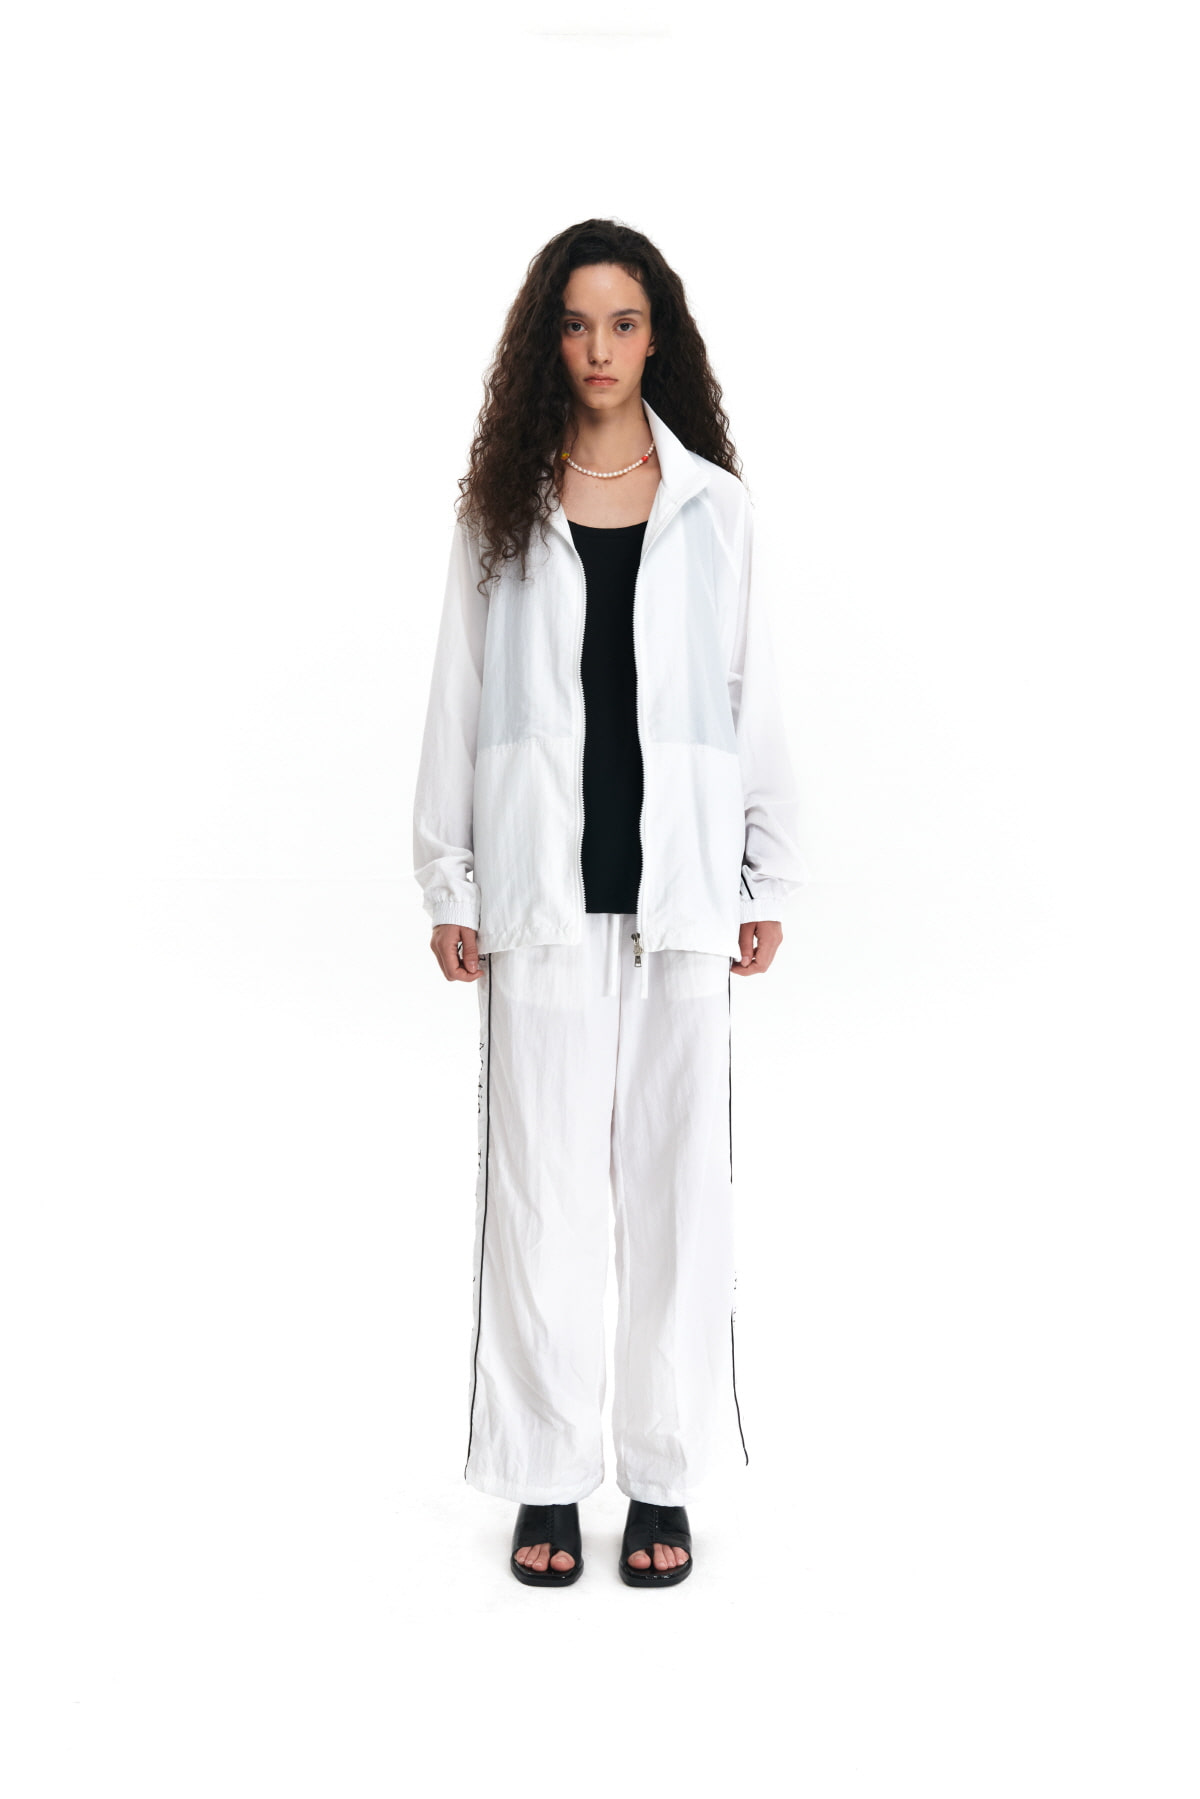 MATIN SPELL TRACK PANTS IN WHITE